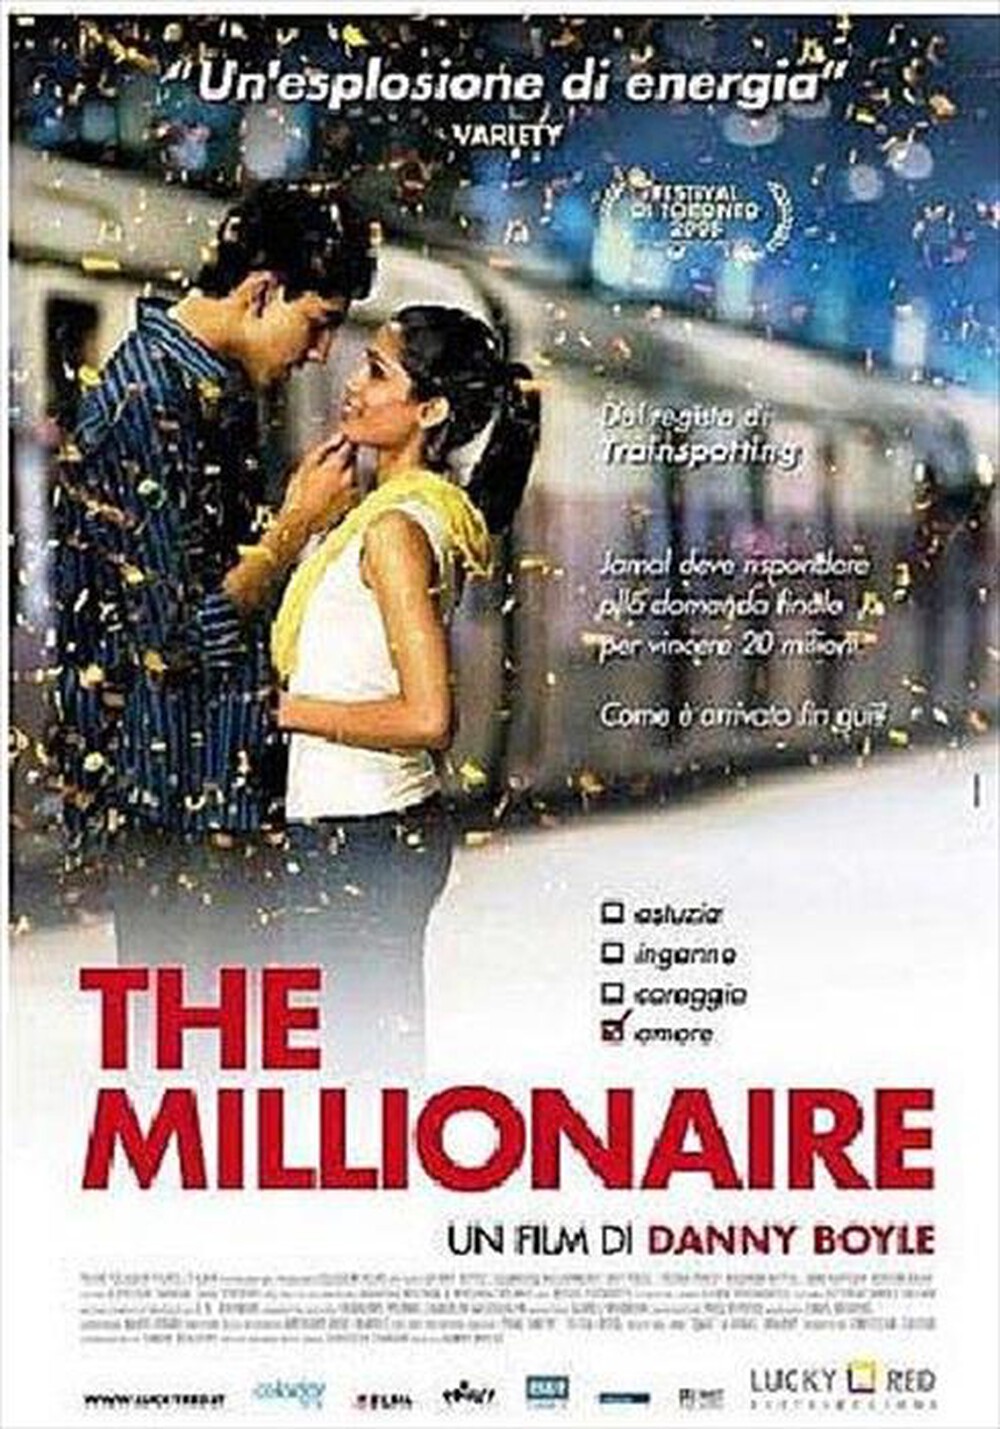 "WARNER HOME VIDEO - Millionaire (The)"